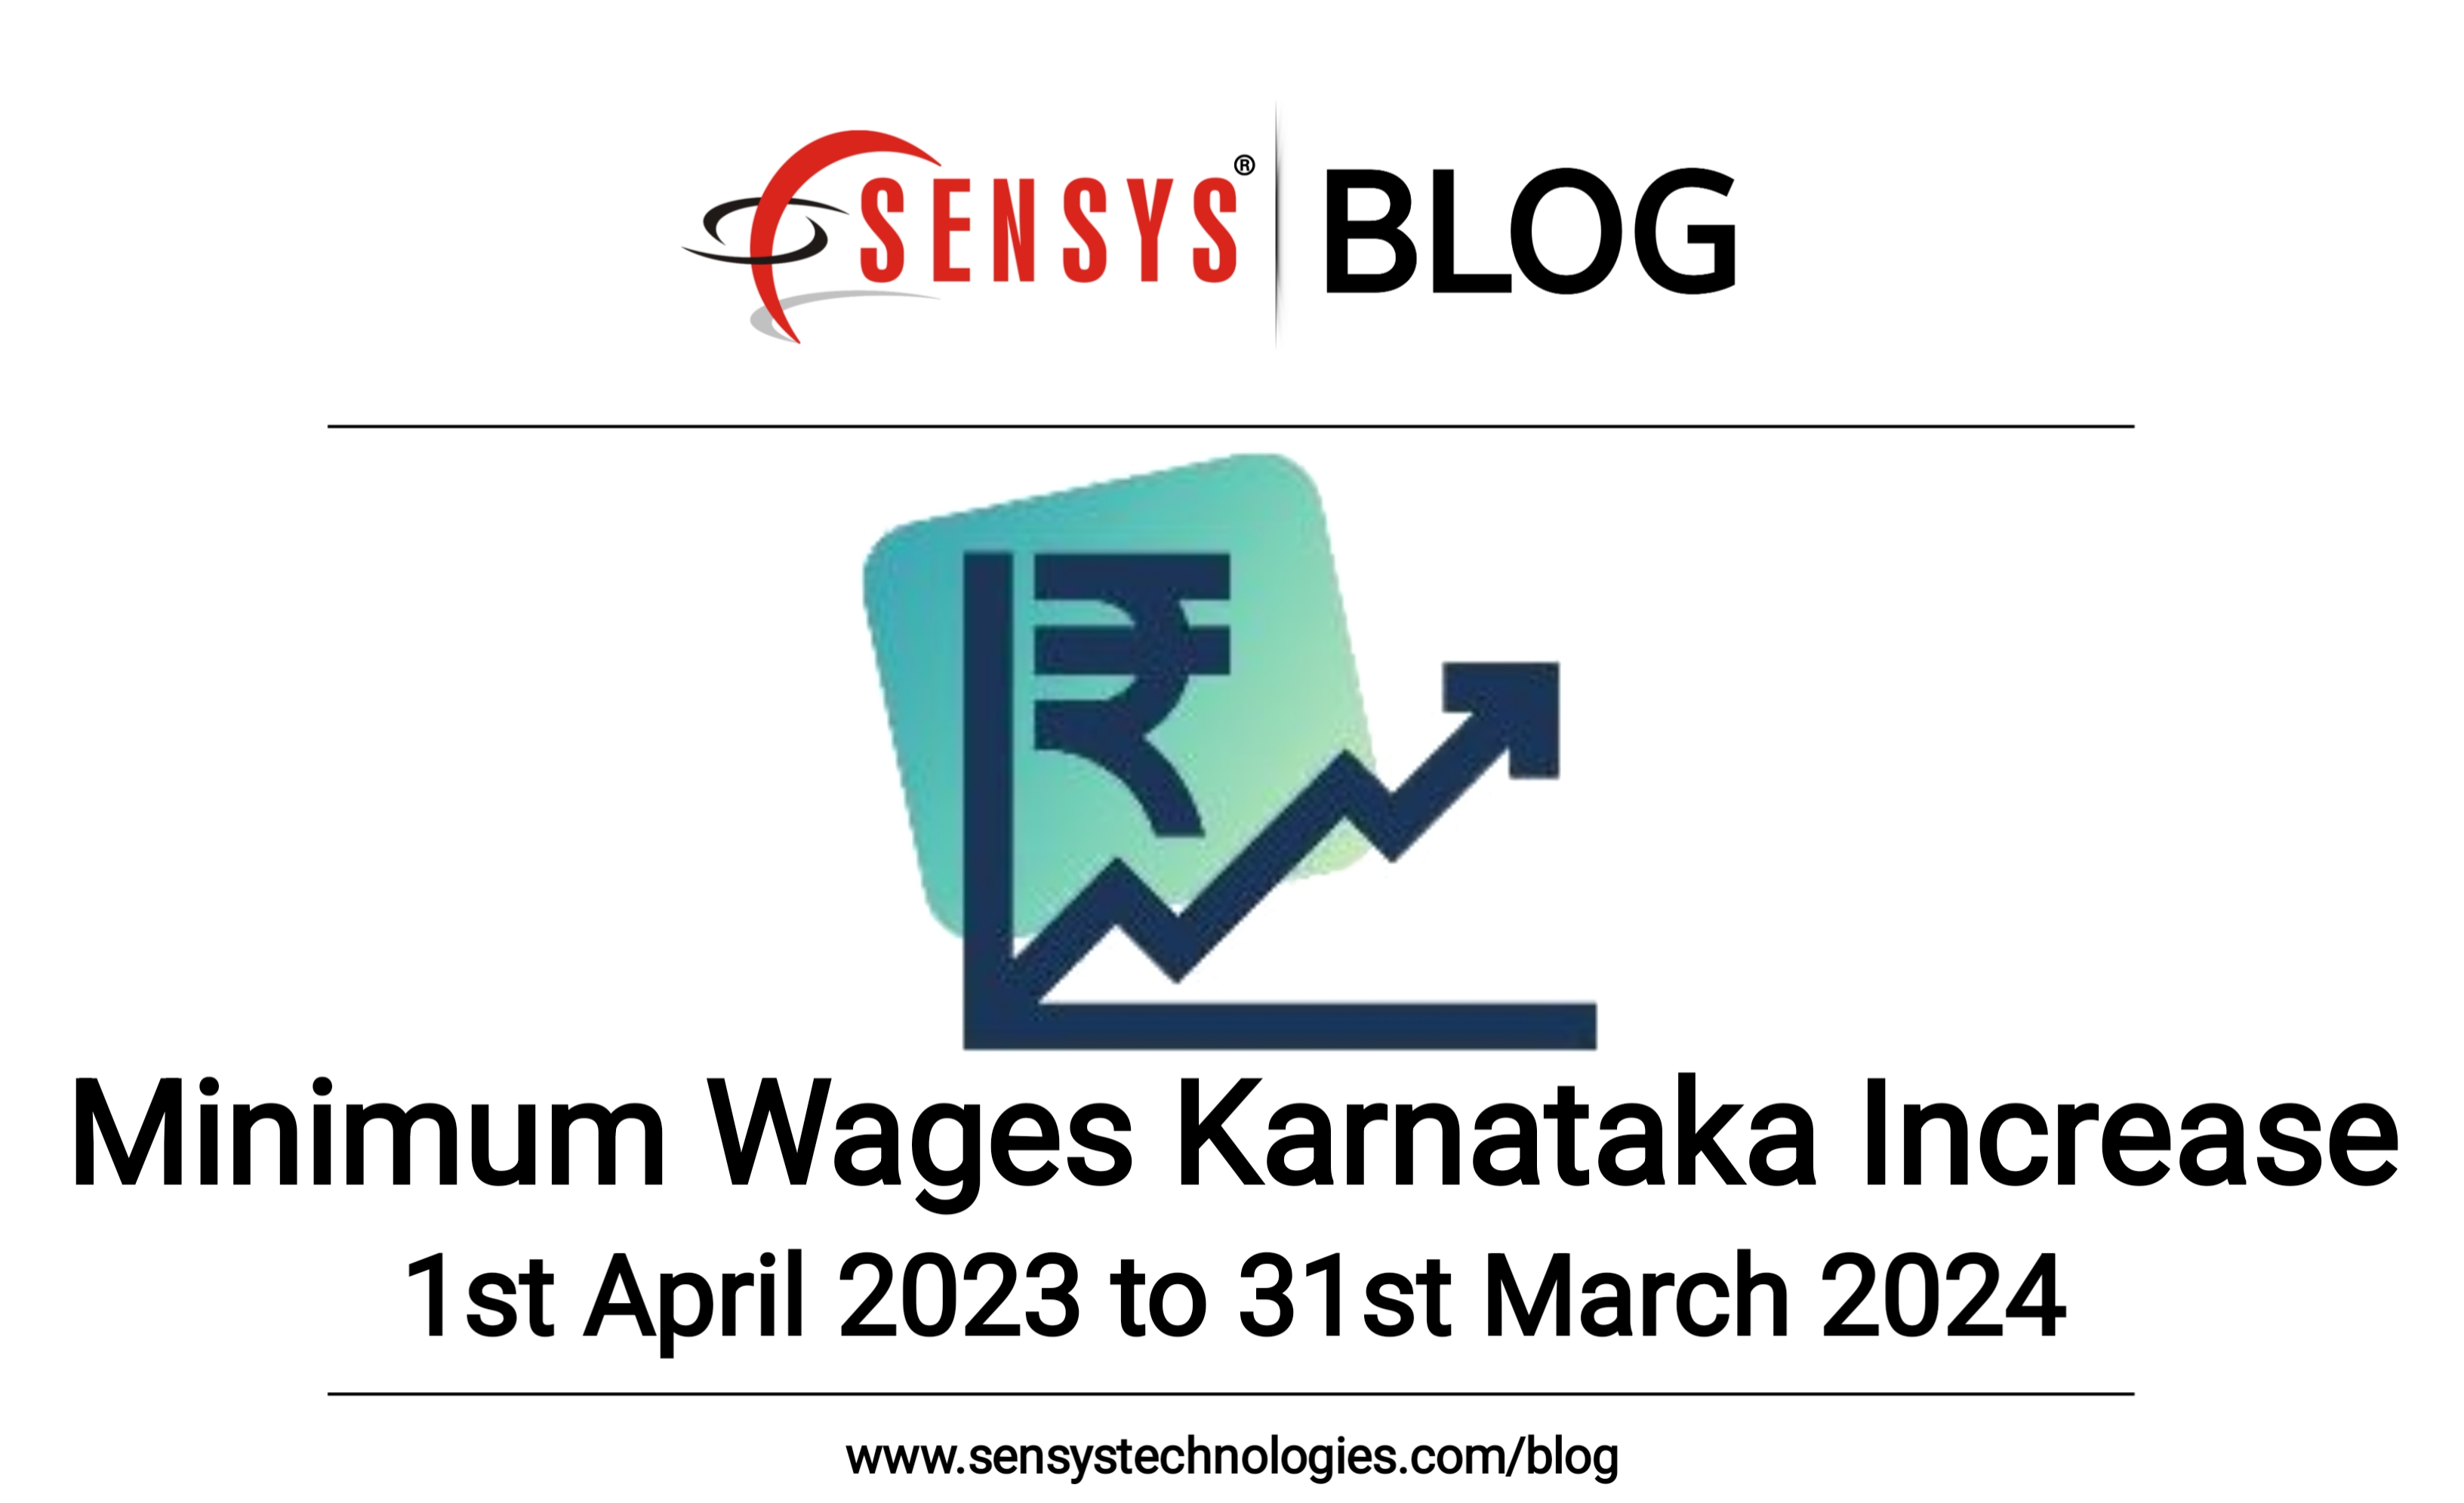 Karnataka Minimum wages revision from 1st Apr 2023 to 31st Mar 2024